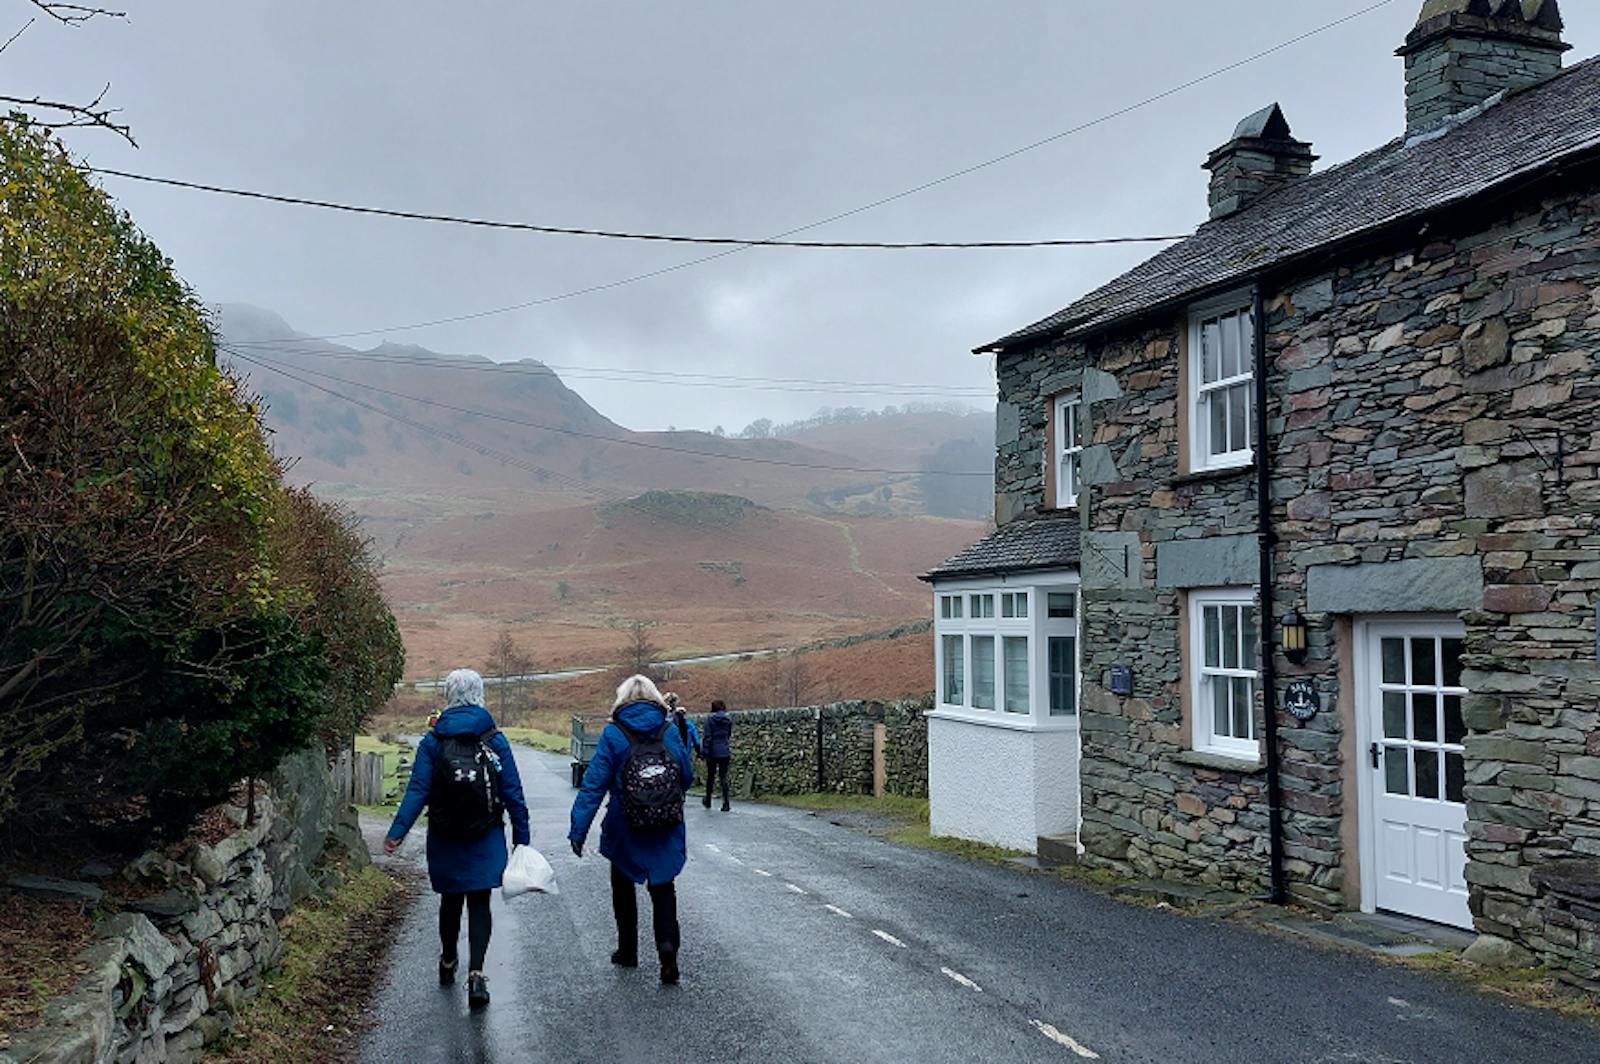 People walking down road next to a house with a mountain in the distance